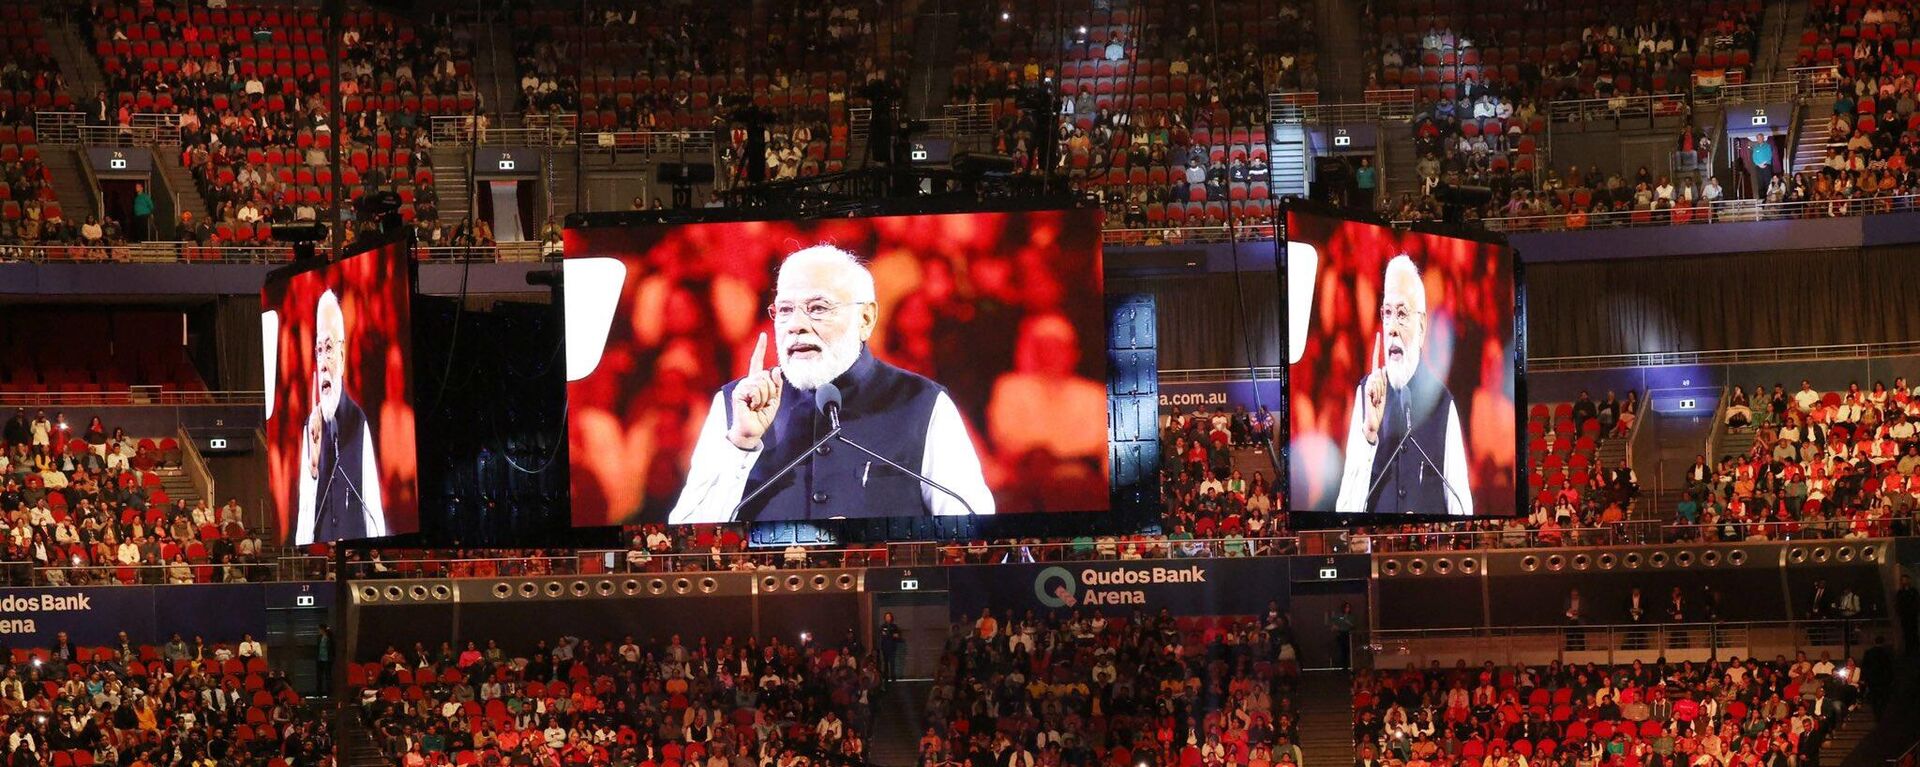 PM Narendra Modi interacts with Indian community at Qudos Bank Arena in Sydney - Sputnik India, 1920, 23.05.2023